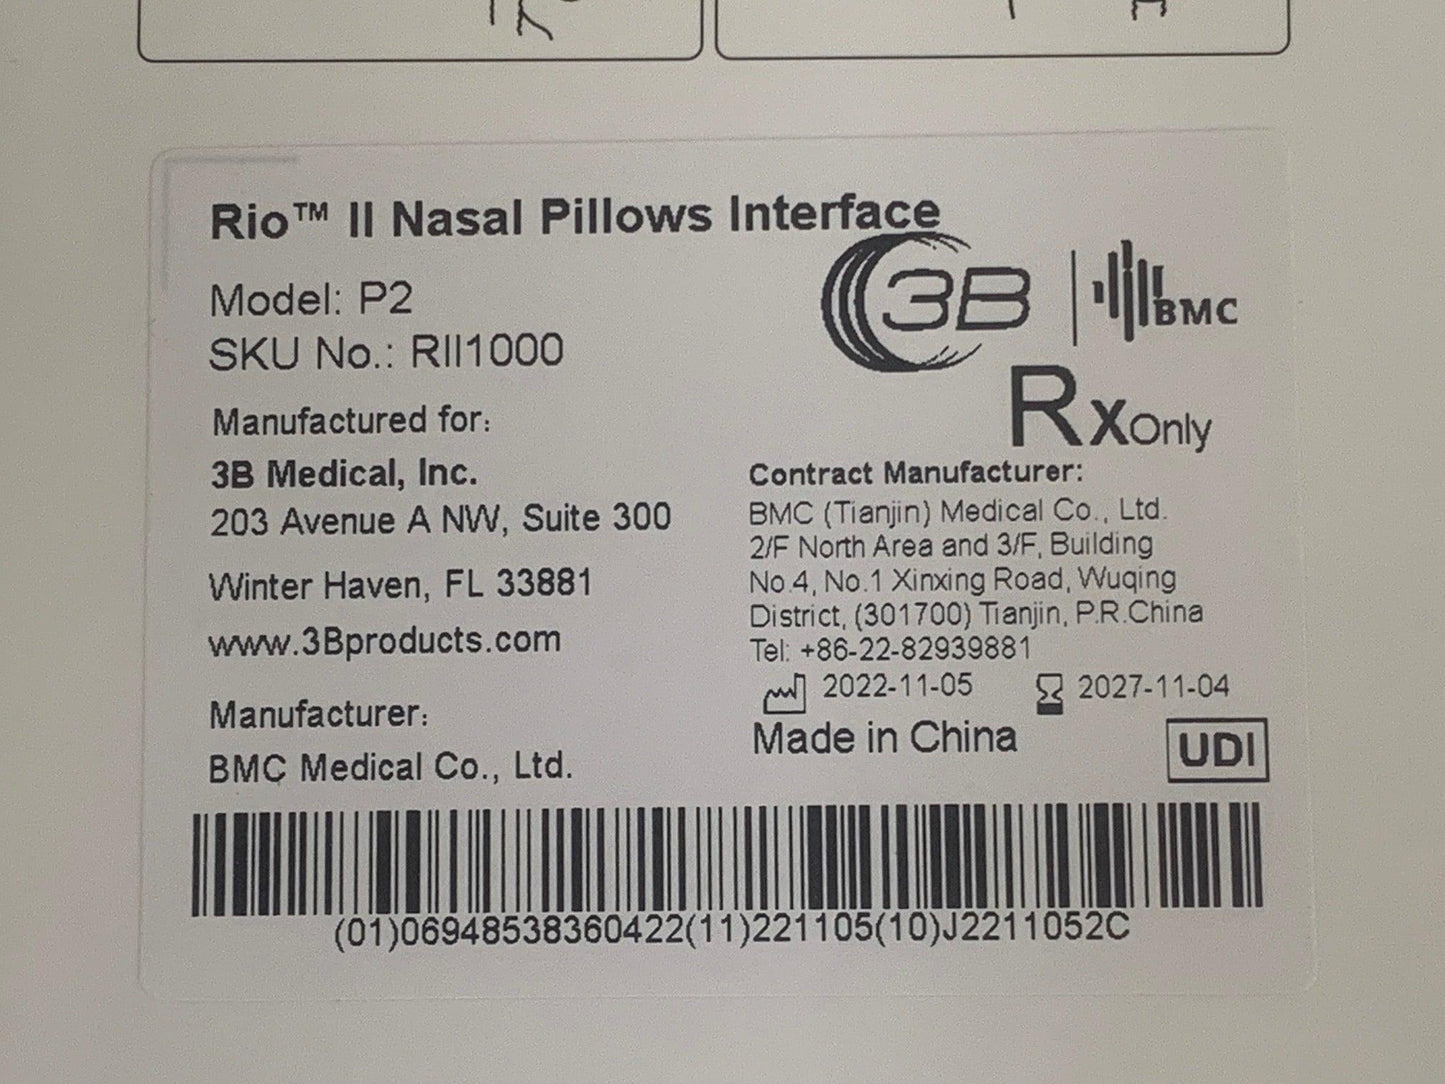 NEW 3B Medical Rio II Nasal Pillows CPAP Mask Interface FitPack with Headgear RII1000 with Free Shipping - MBR Medicals